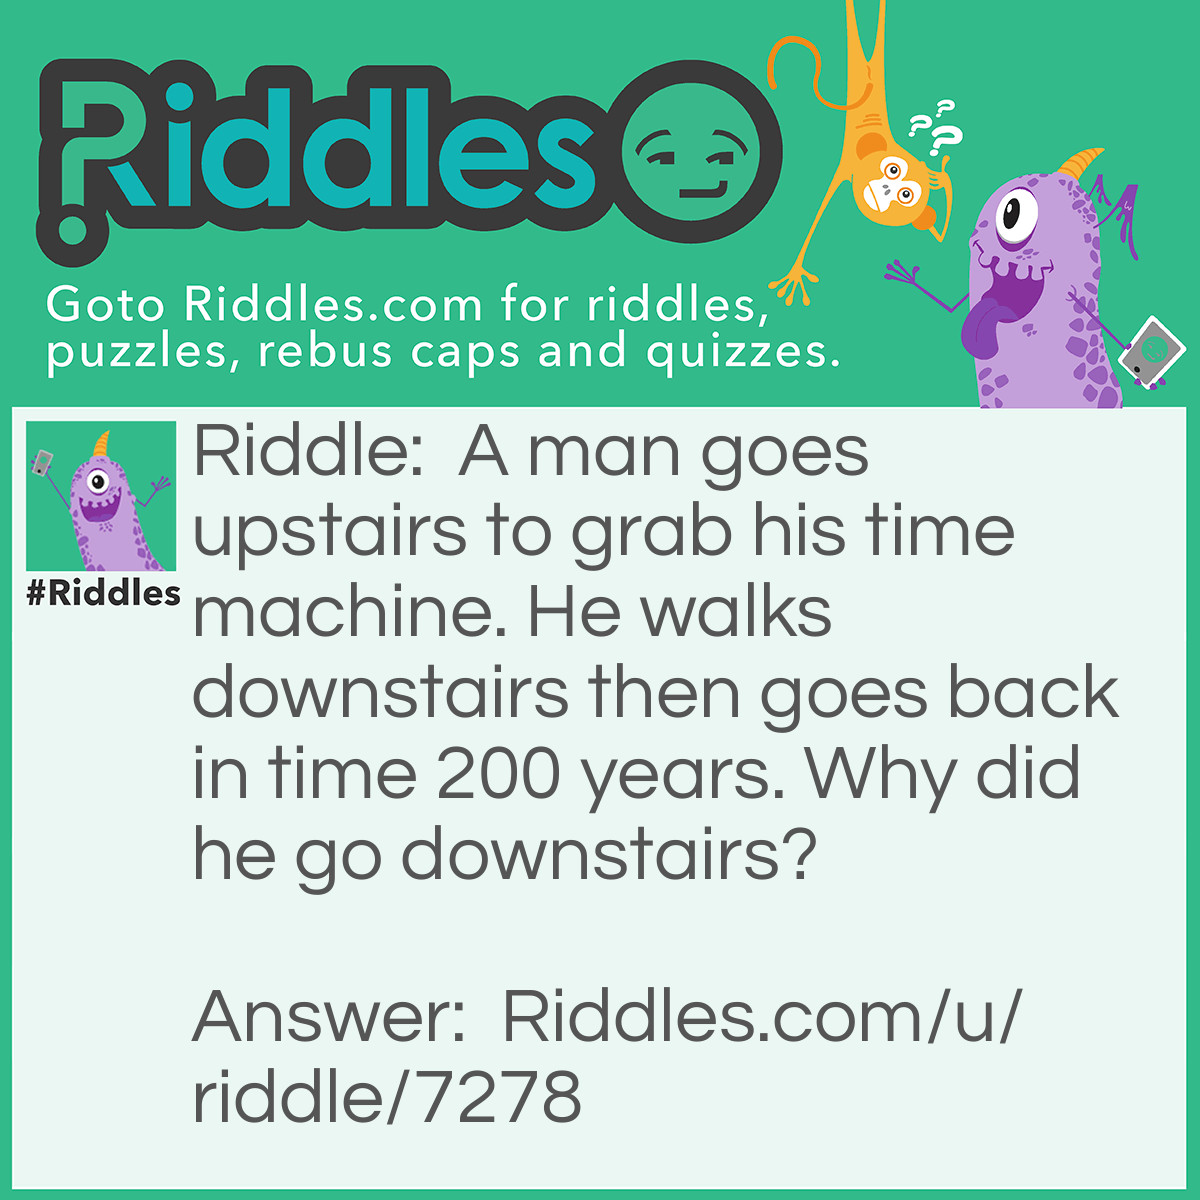 Riddle: A man goes upstairs to grab his time machine. He walks downstairs then goes back in time 200 years. Why did he go downstairs? Answer: Because if he went back in time from upstairs, that would be a nasty fall because the house wouldn't have been there 200 years ago